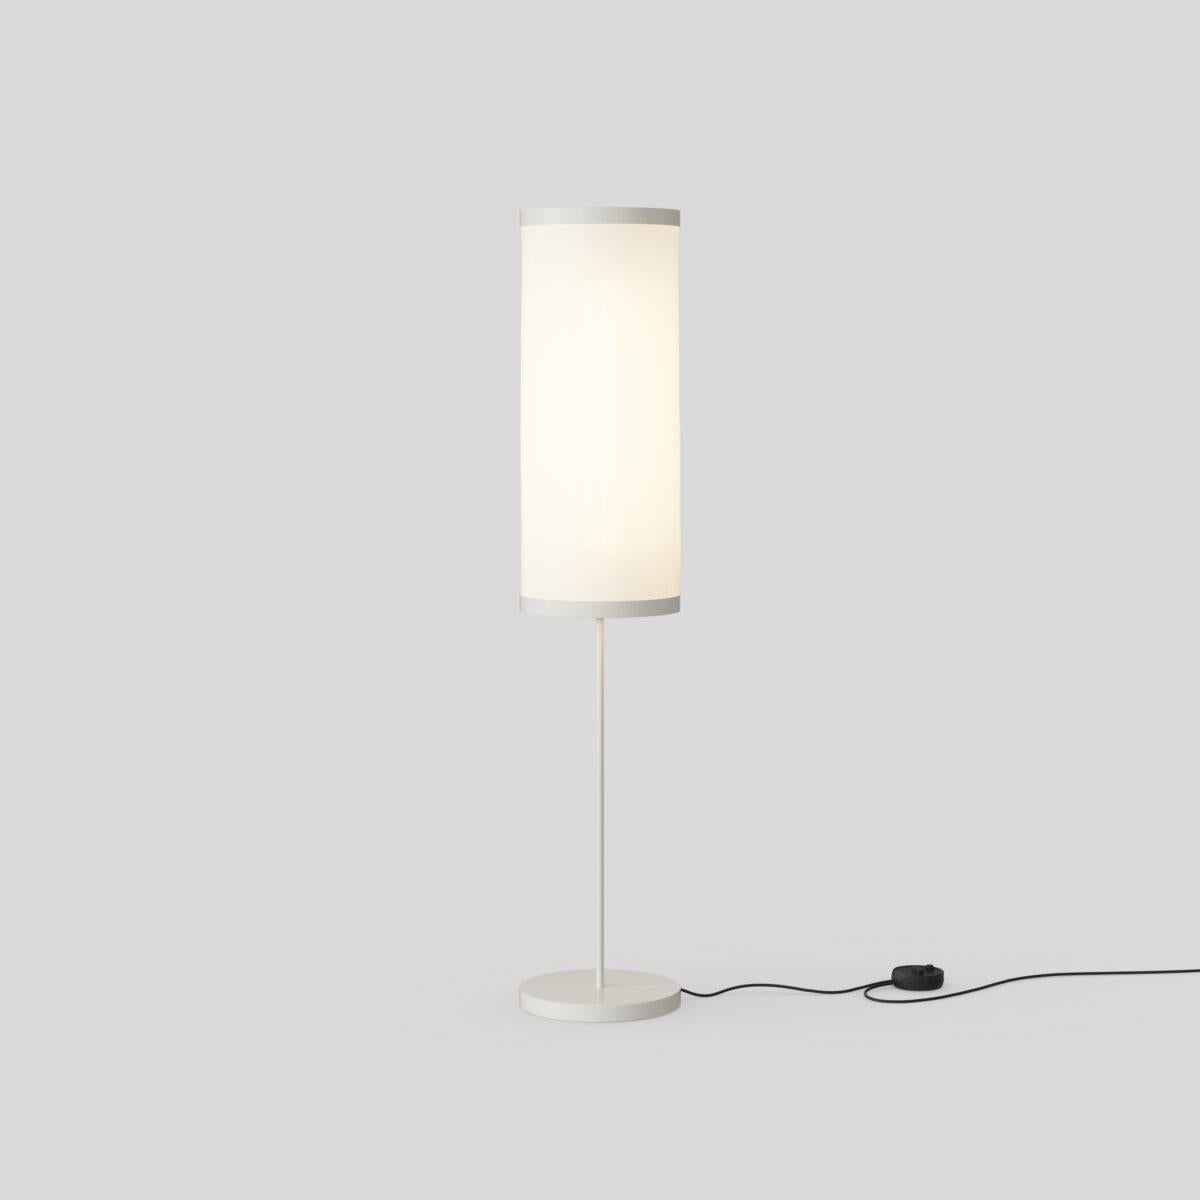 Isol Floor Lamp
Design by David Thulstrup

Specifications: Isolators
Typology: Floor
Materials: Aluminium Structure, Acoustic Absorbent Fabric Diffuser with Snowsound® Technology
Dimensions: Ø 300 x H 1480 mm 
Diffuser diameter: Ø 300 mm x 760